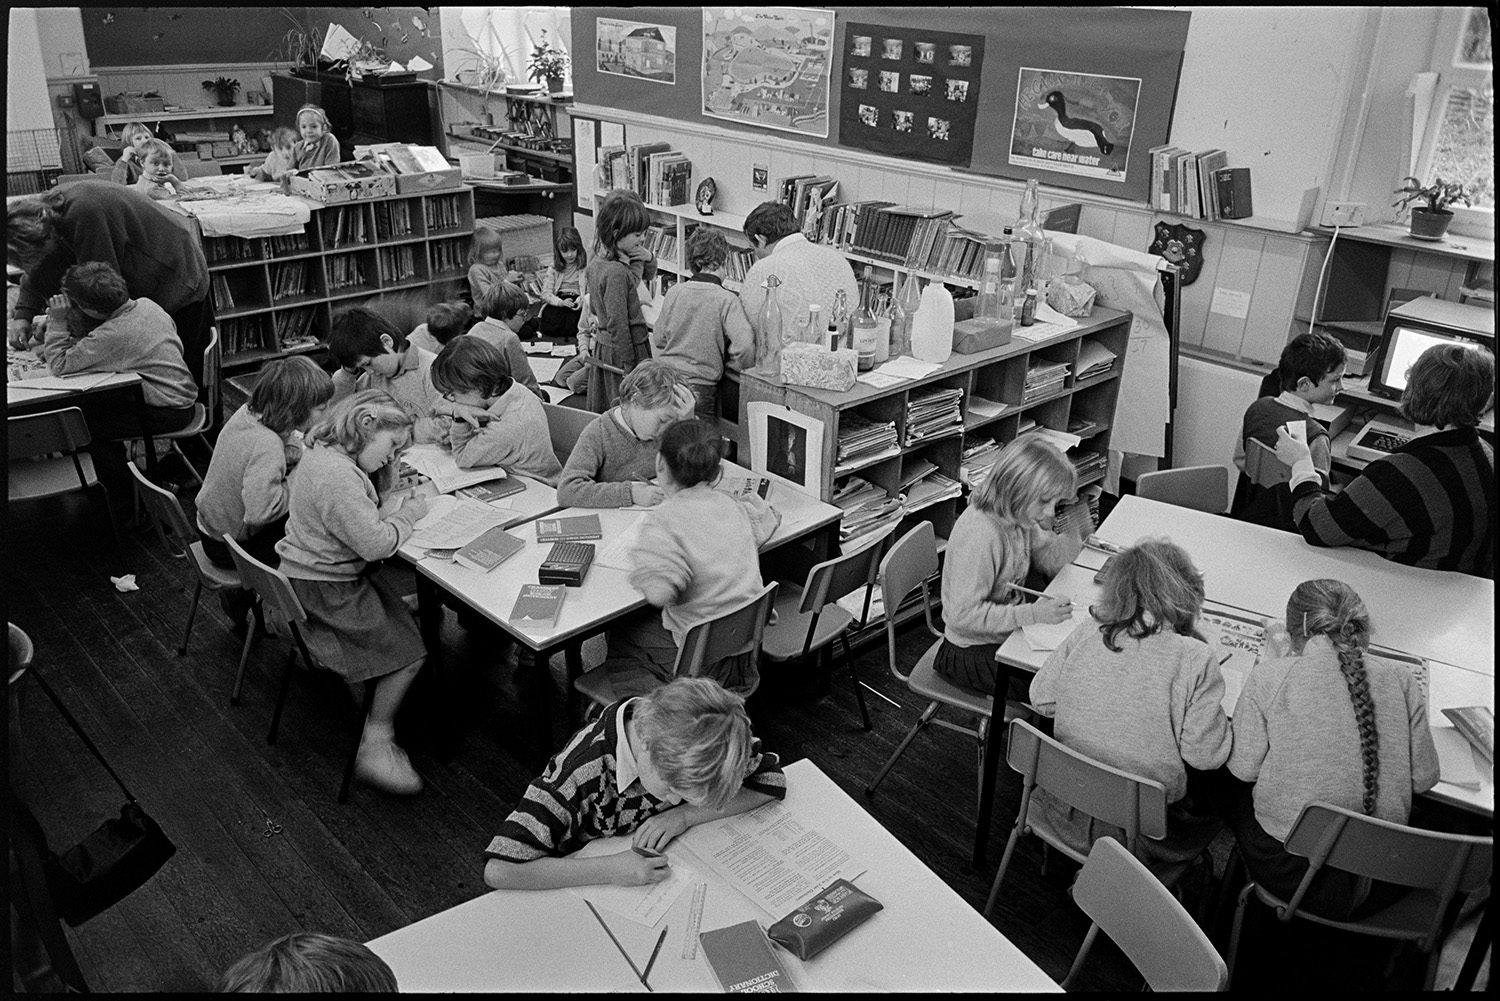 Interior of primary school with children at work, to show crowding to get new building.
[Interior of Dolton Primary School showing a classroom with children working at tables and in front of a computer in between books shelves. Three teachers are also in the classroom. The image was taken to demonstrate overcrowding in the school.]